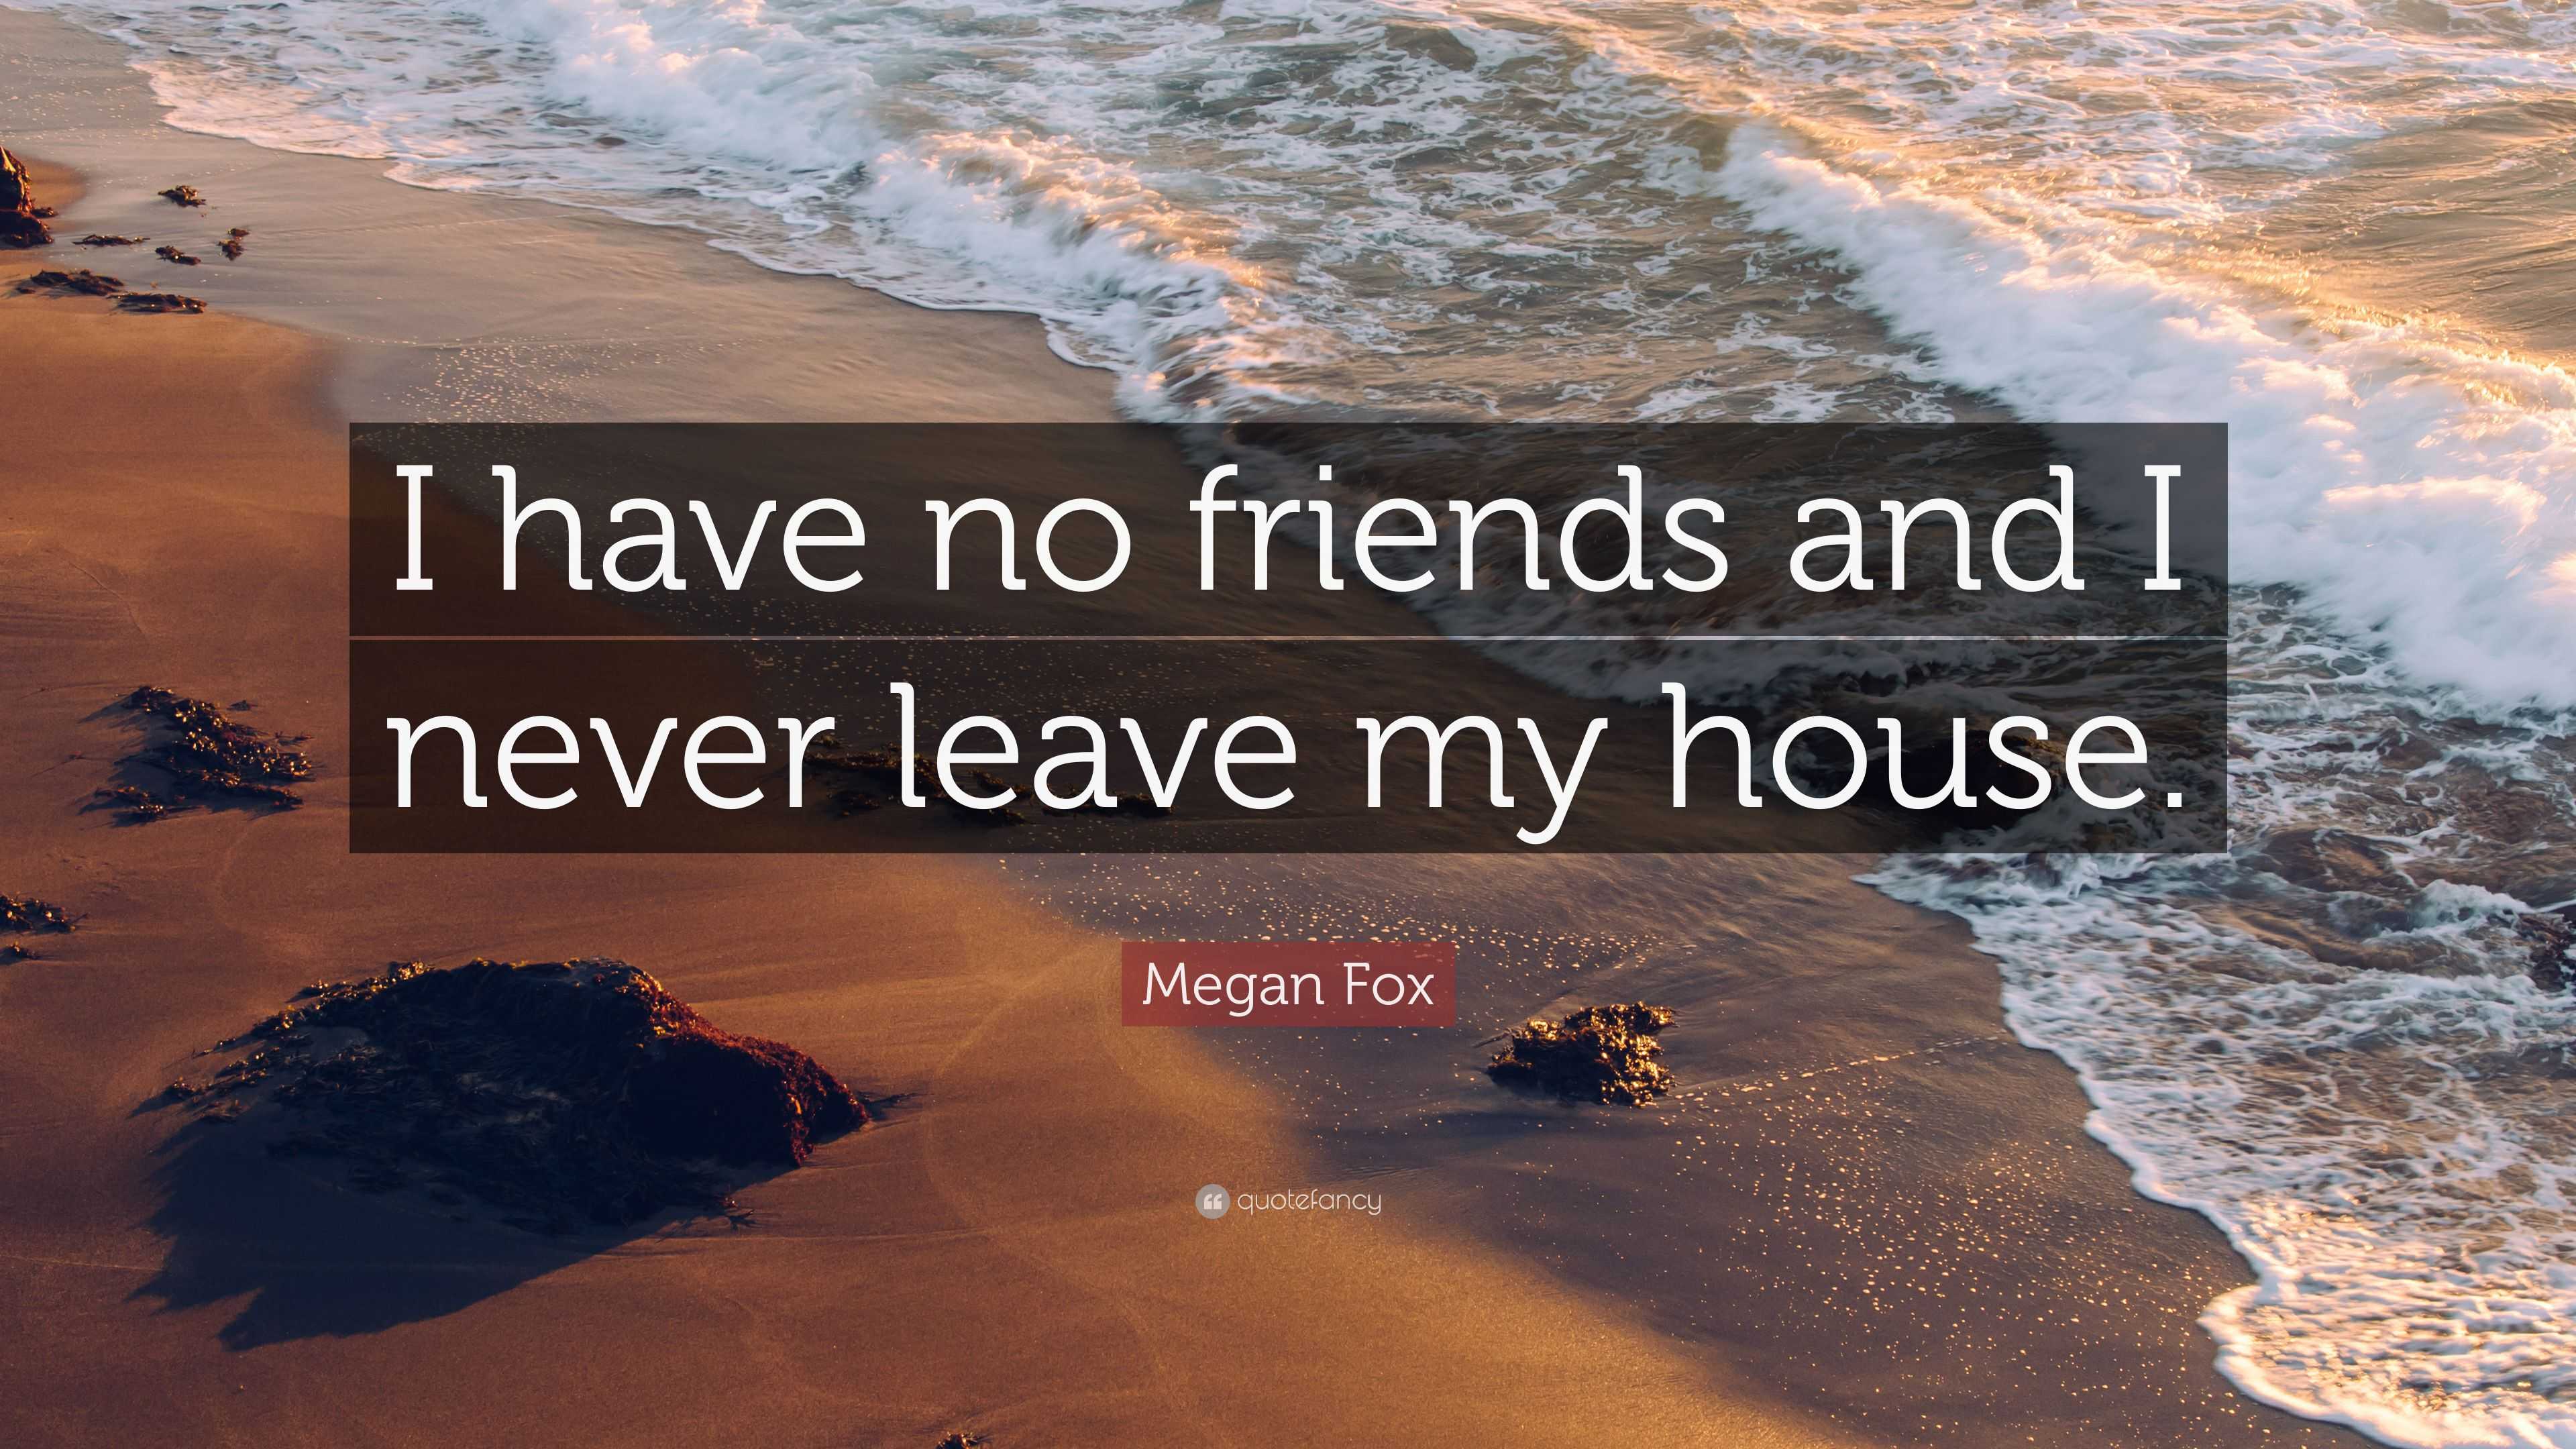 Megan Fox Quote: “I have no friends and I never leave my house.”